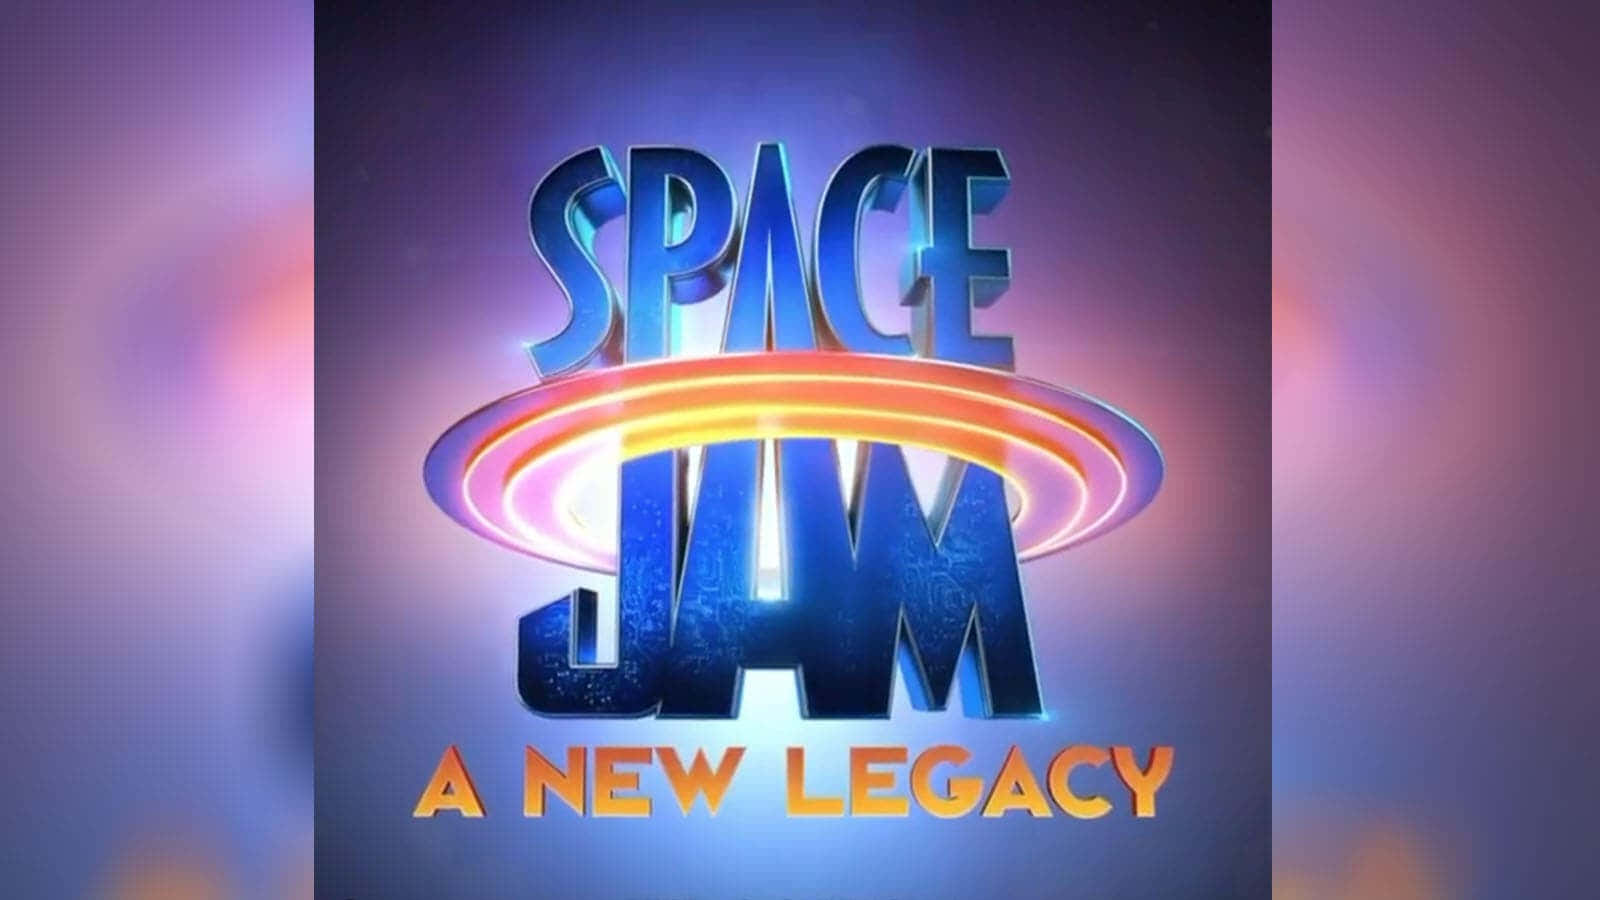 Space Jam: A New Legacy - An epic game of basketball awaits! Wallpaper